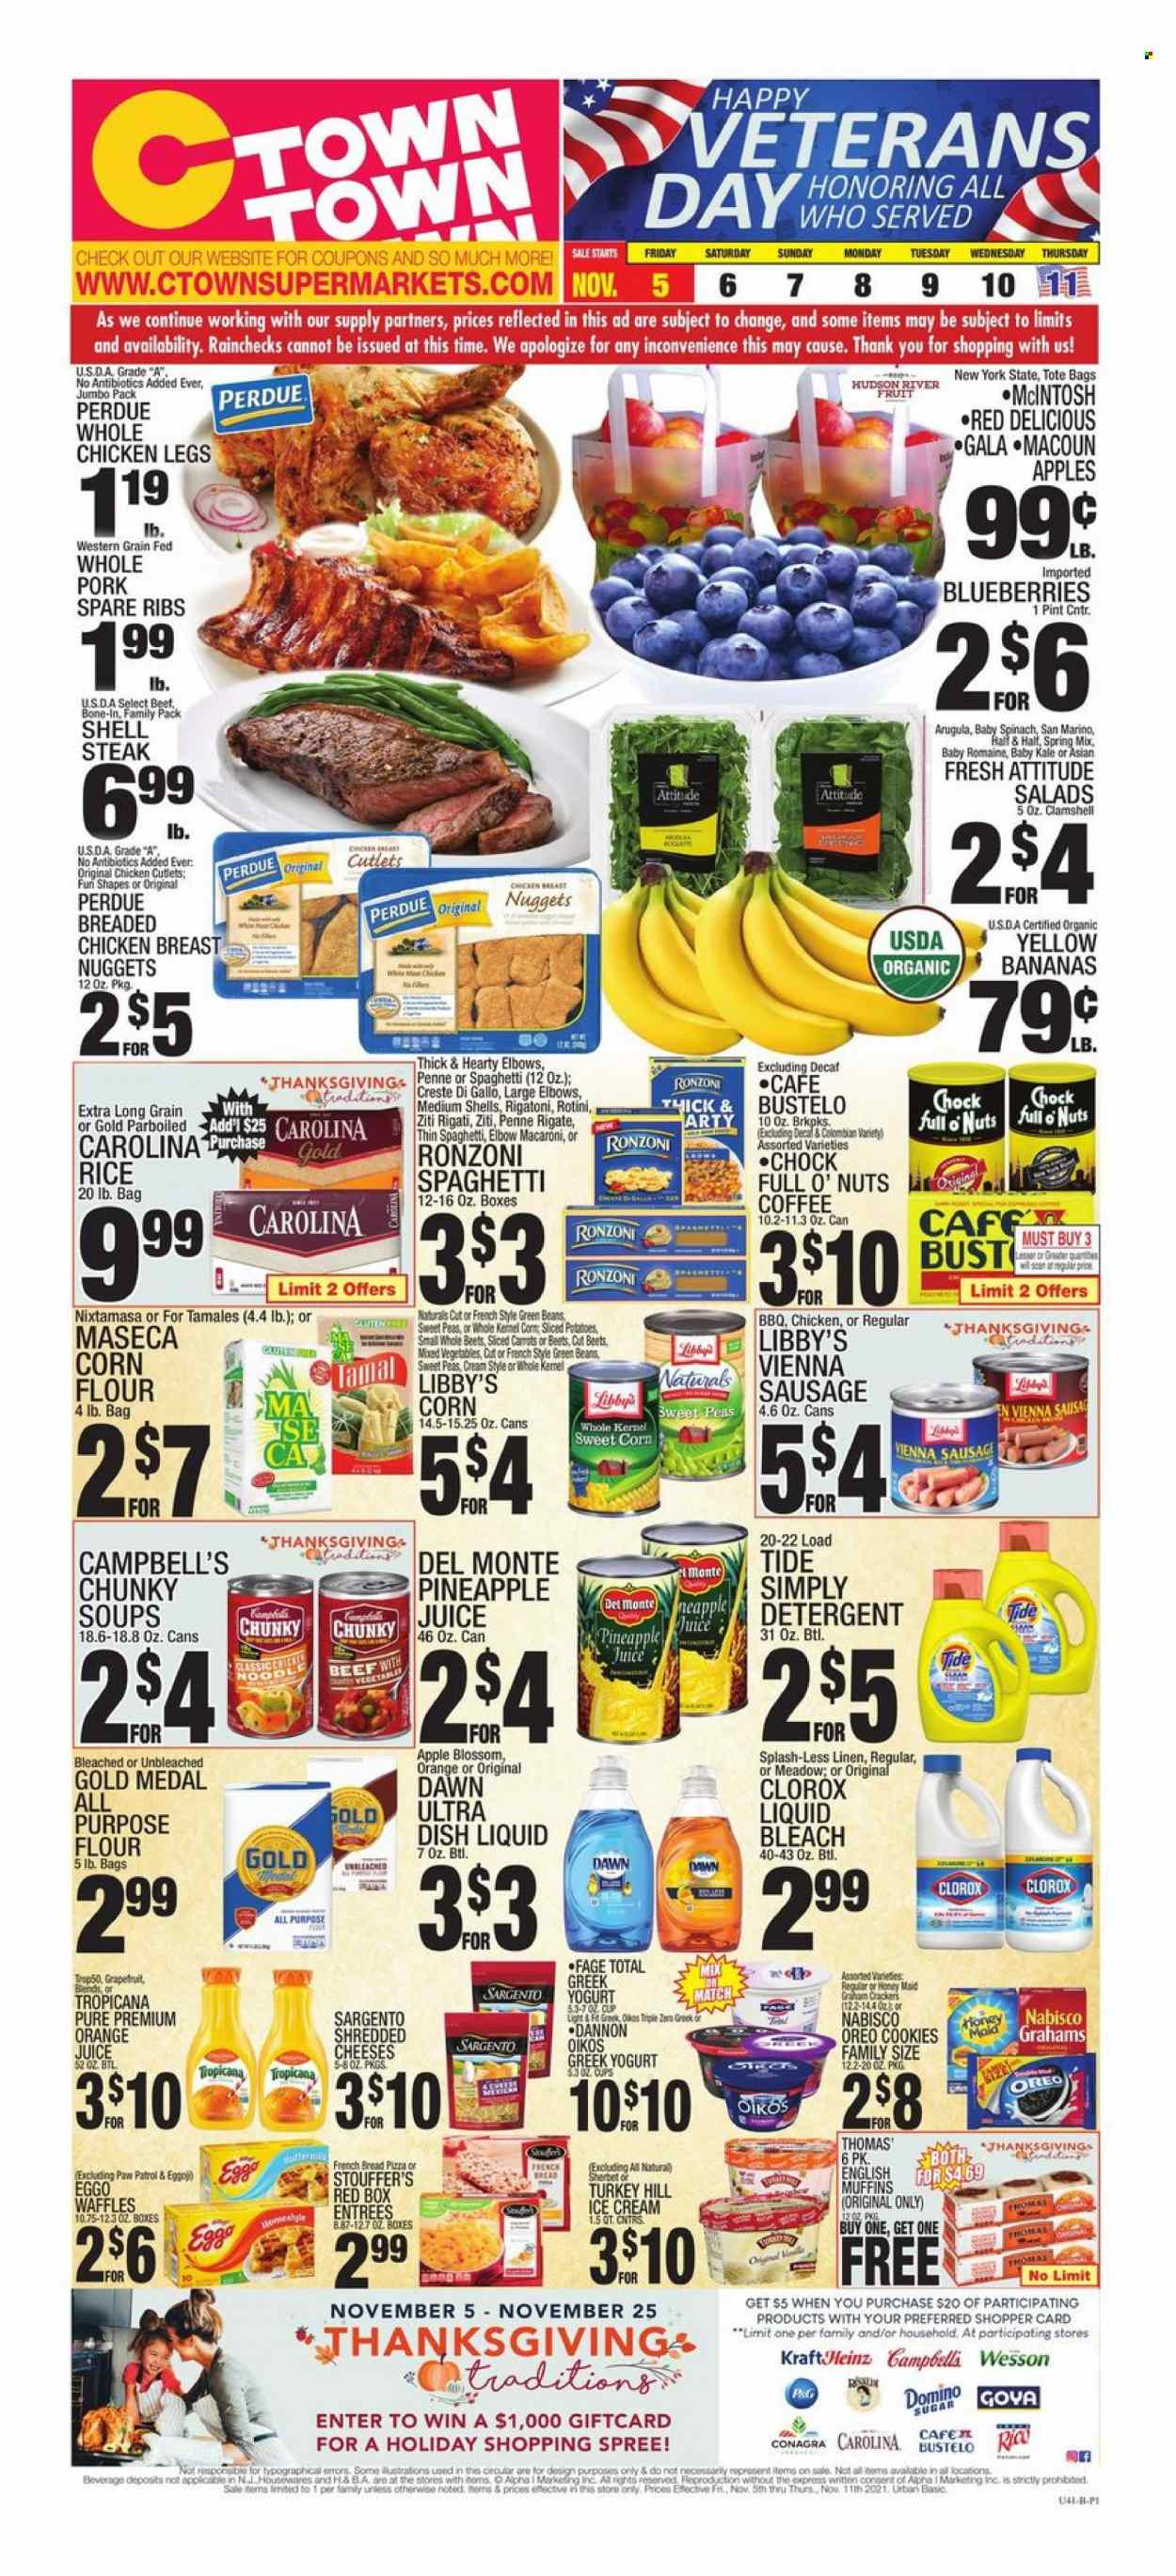 thumbnail - C-Town Flyer - 11/05/2021 - 11/11/2021 - Sales products - bread, english muffins, french bread, waffles, green beans, kale, potatoes, sweet corn, Gala, grapefruits, Red Delicious apples, pineapple, Campbell's, macaroni, nuggets, chicken nuggets, noodles, Perdue®, sausage, vienna sausage, Sargento, greek yoghurt, Oreo, Oikos, Dannon, Blossom, ice cream, sherbet, Stouffer's, cookies, Paw Patrol, all purpose flour, flour, sugar, corn flour, Honey Maid, rice, parboiled rice, penne, pineapple juice, orange juice, juice, coffee, L'Or, whole chicken, chicken cutlets, chicken legs, steak, pork meat, pork ribs, pork spare ribs. Page 1.